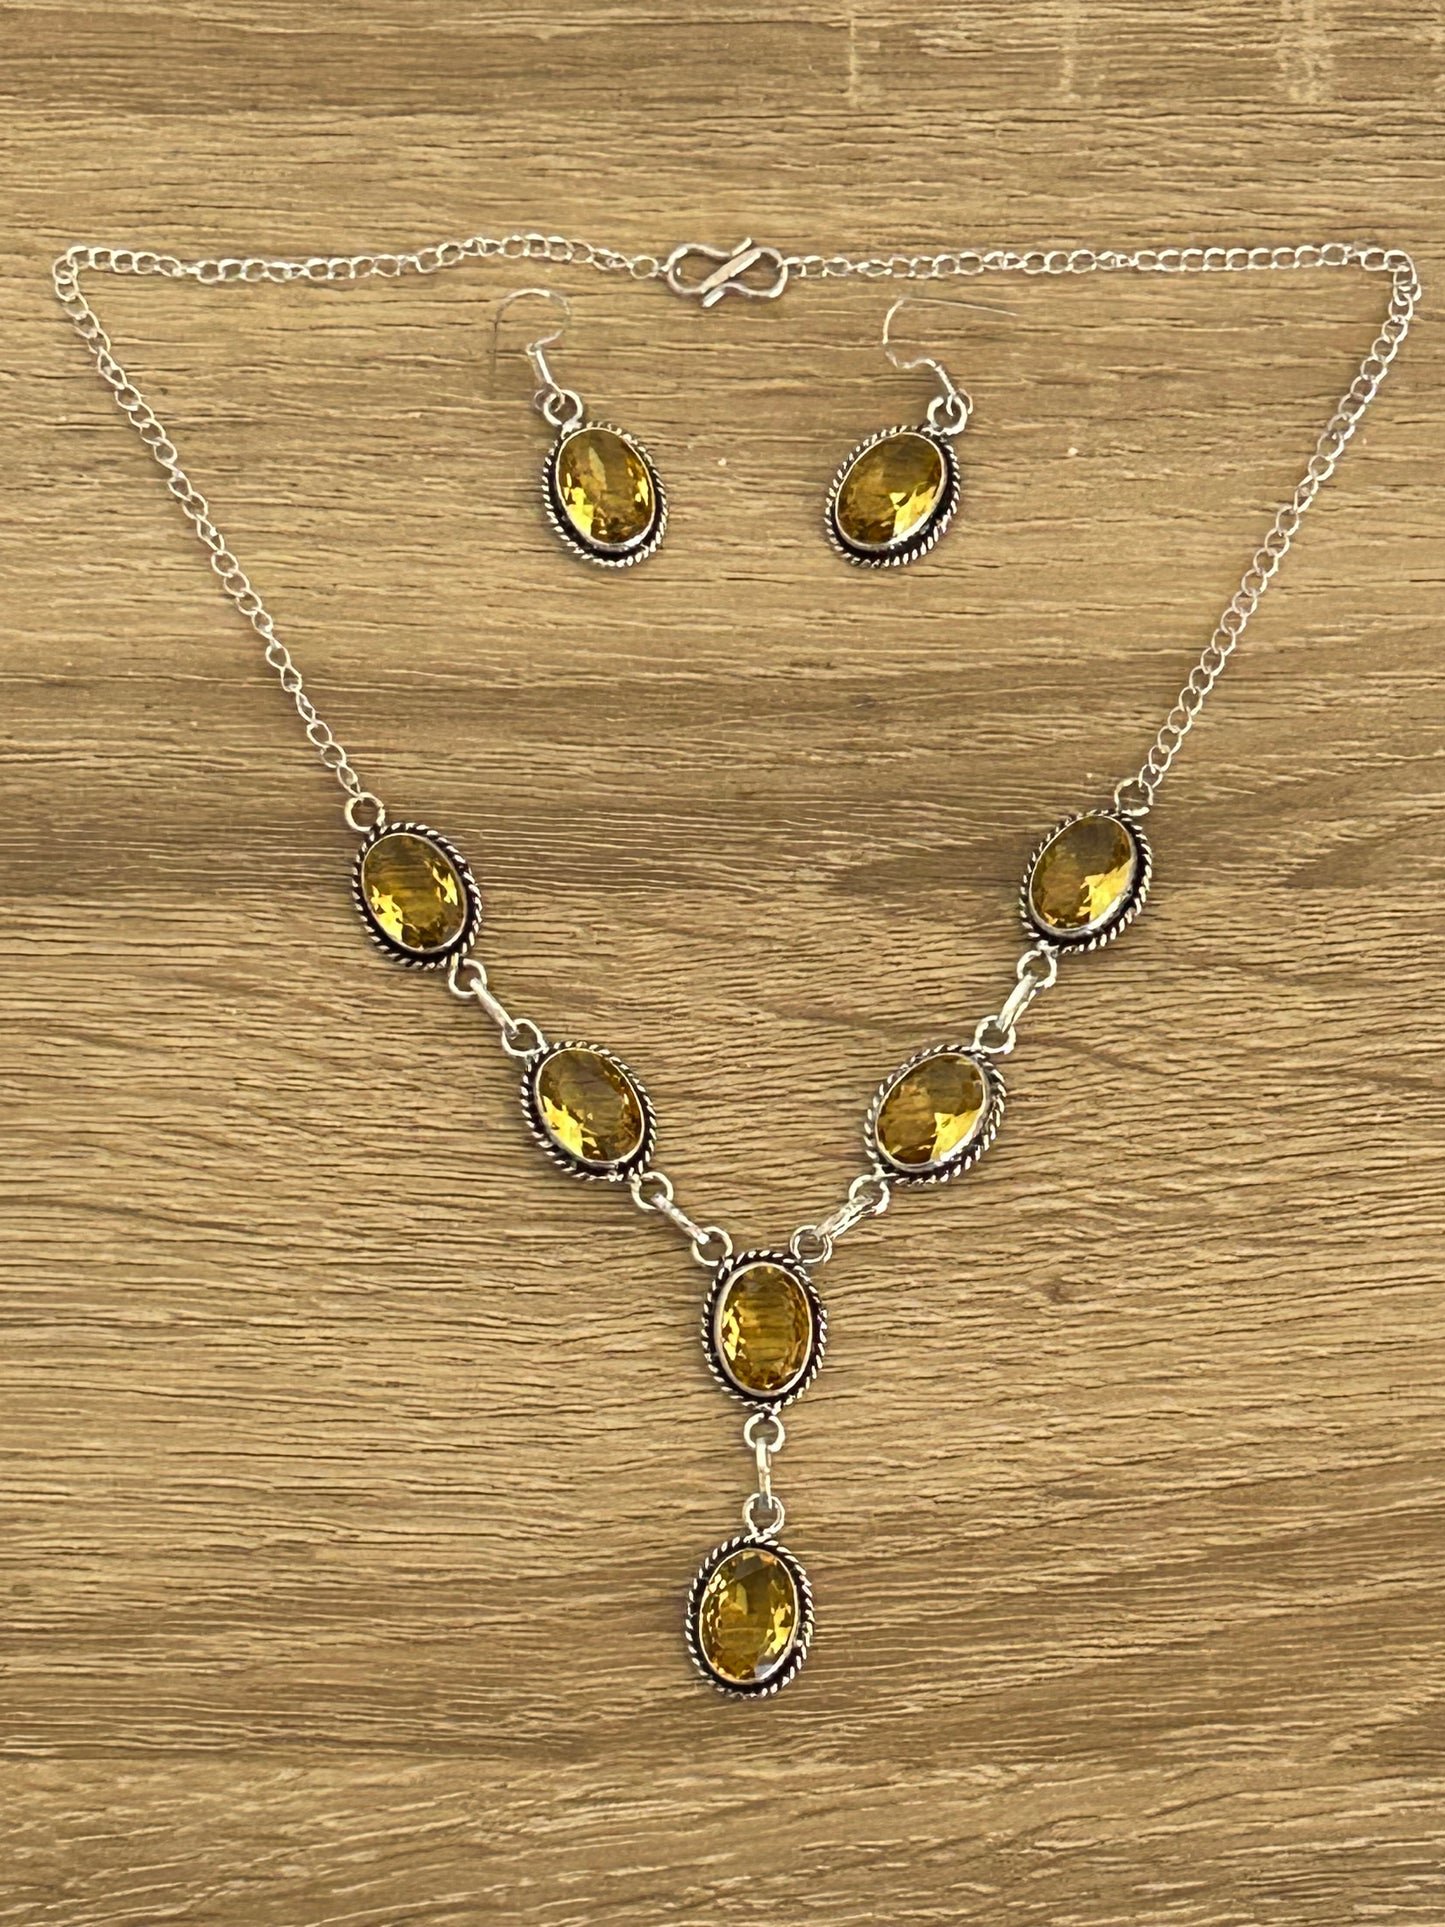 Citrine and 925 silver earrings and necklace set.  necklace has six faceted citrine gems and the earrings have one  faceted citrine each